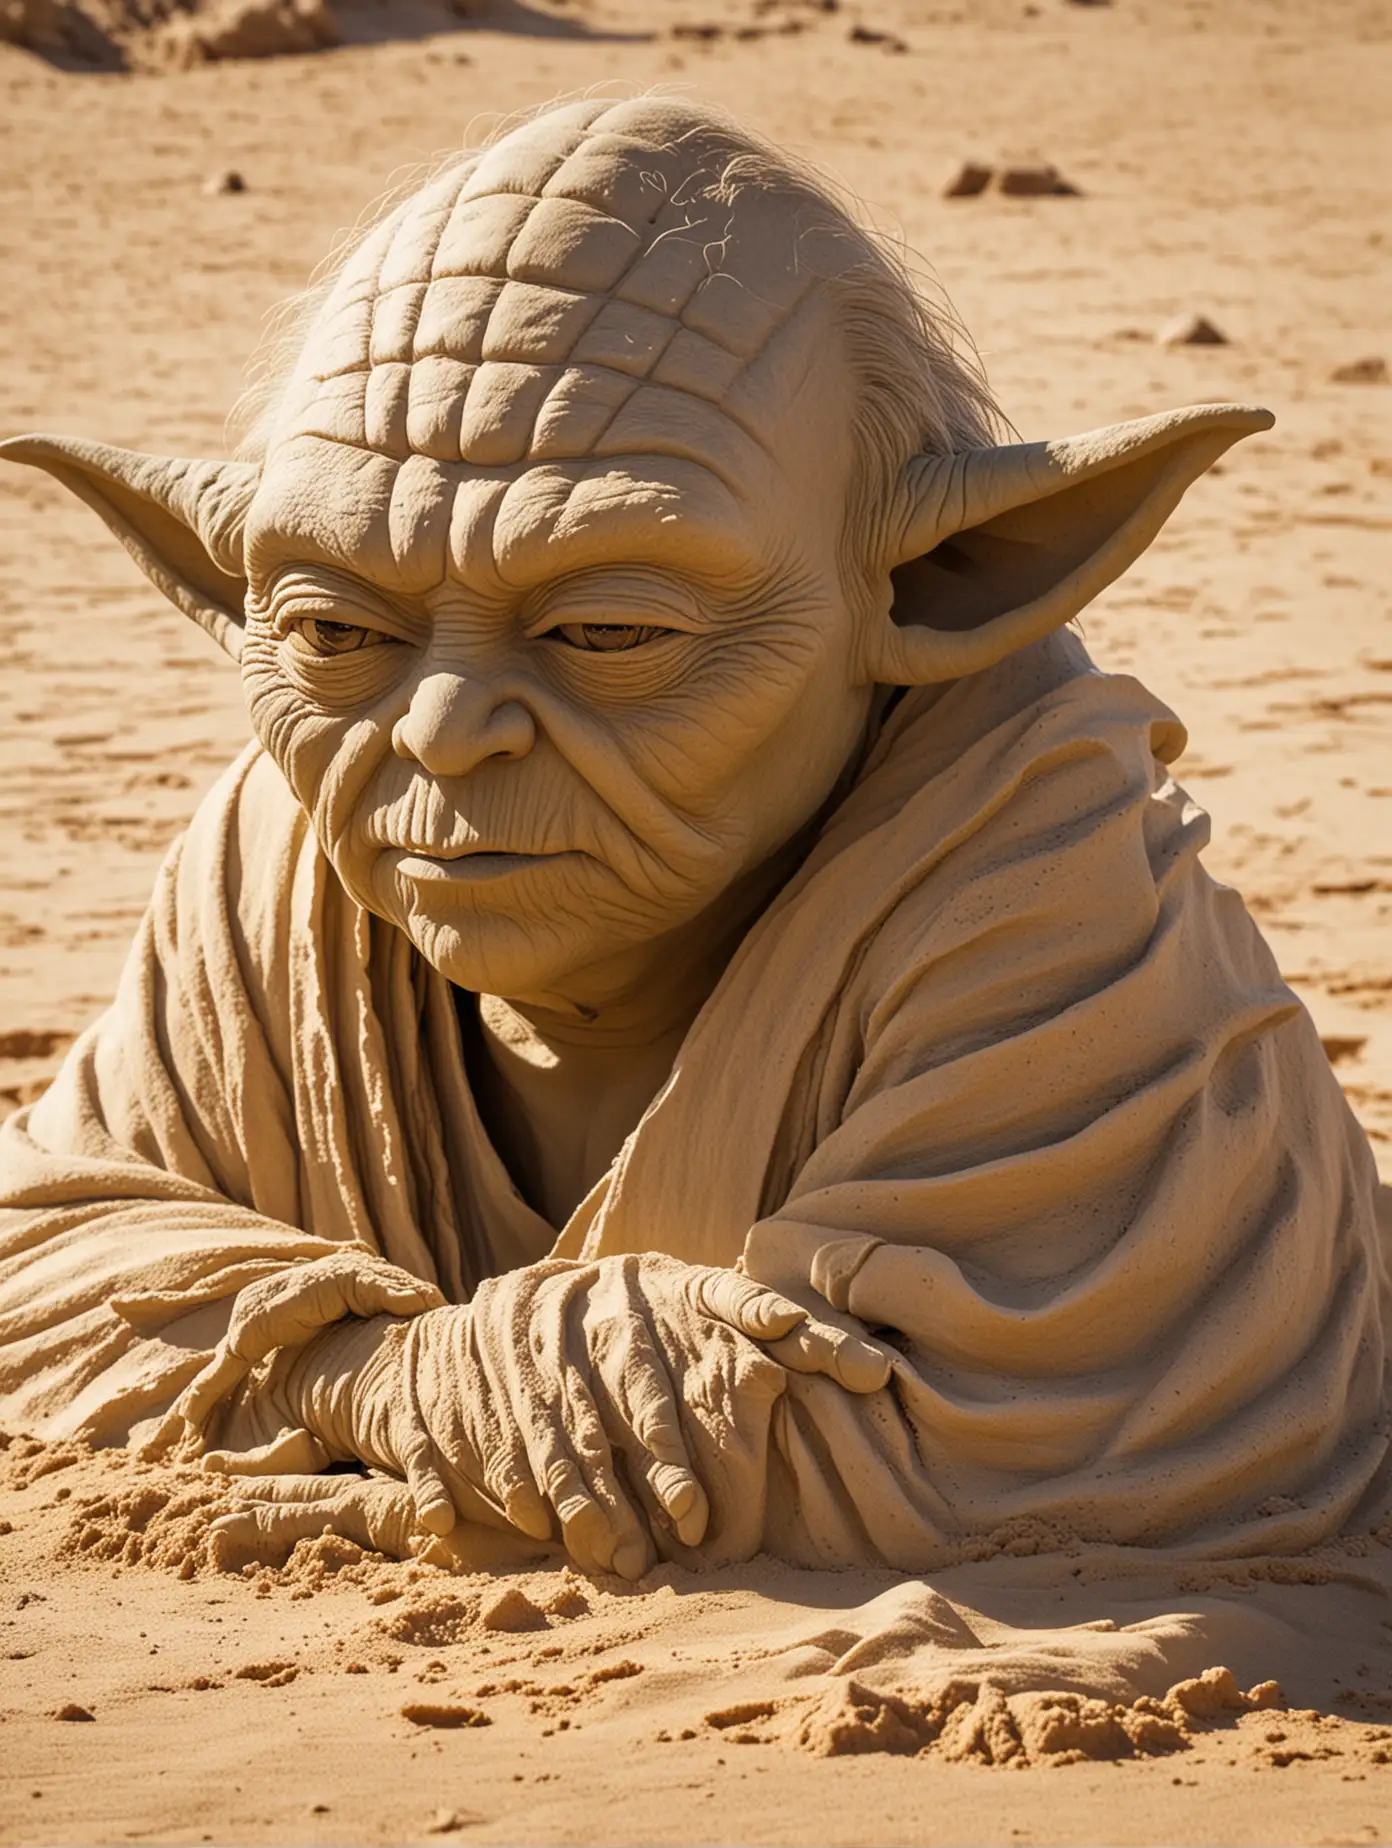 "A close-up of a sand figure of Master Yoda in the depths of the desert. Getting every minute detail illuminated by the harsh desert sun, from the wrinkles around his wise and kind eyes to the grooves in the Jedi Master's forehead.